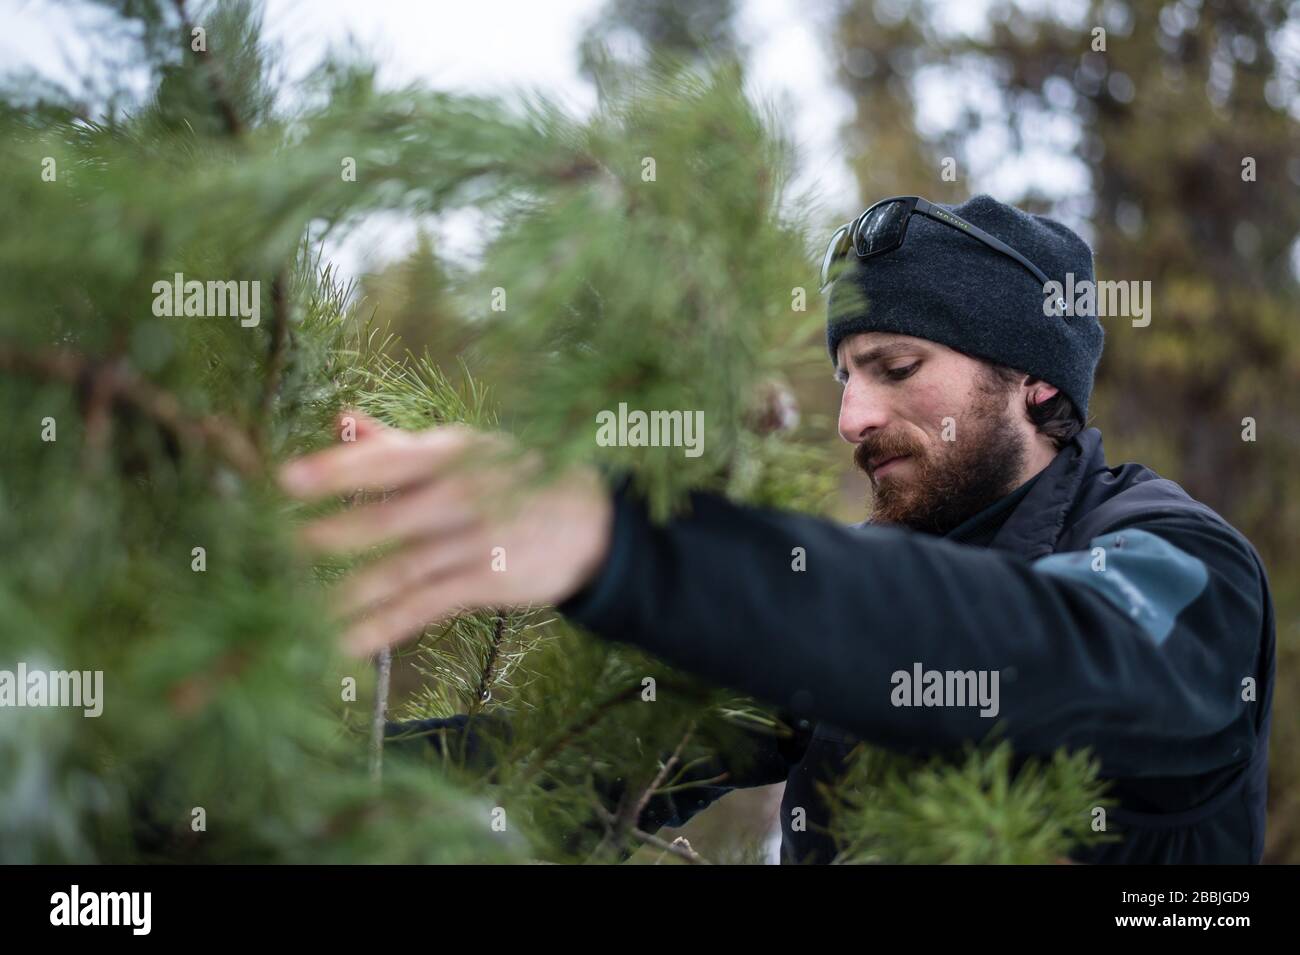 Loading up a Christmas tree and heading home. Stock Photo